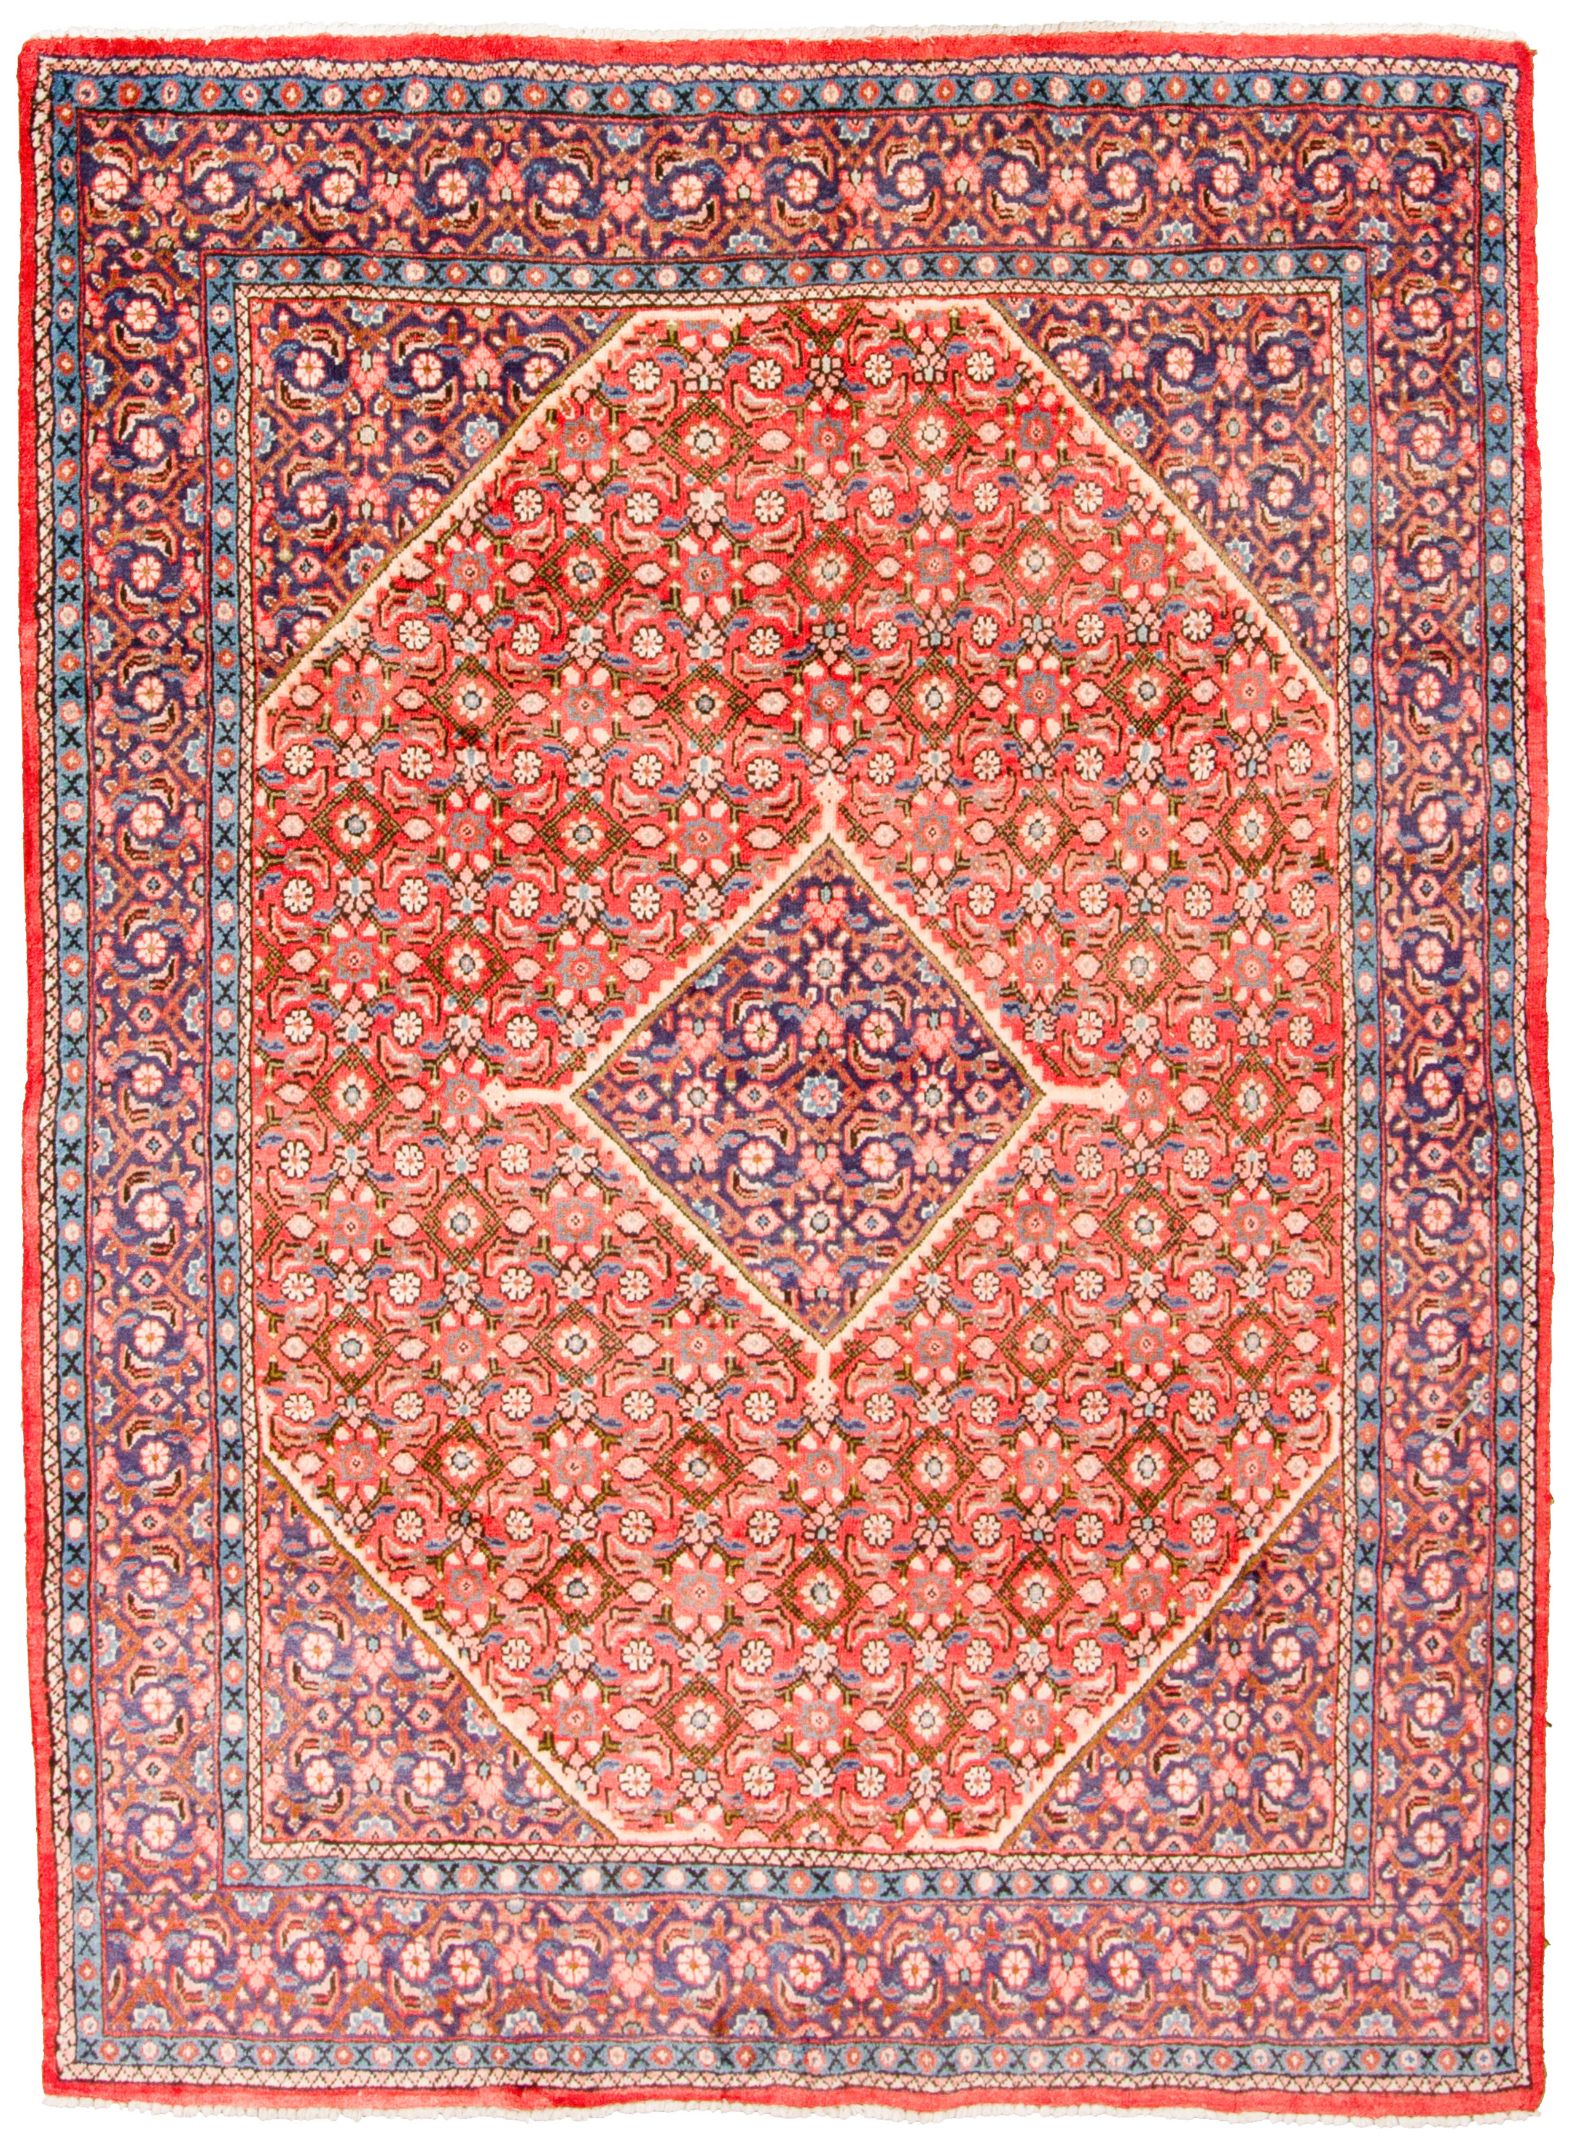 Hand-knotted Mahal  Wool Rug 6'11" x 9'10" Size: 6'11" x 9'10"  